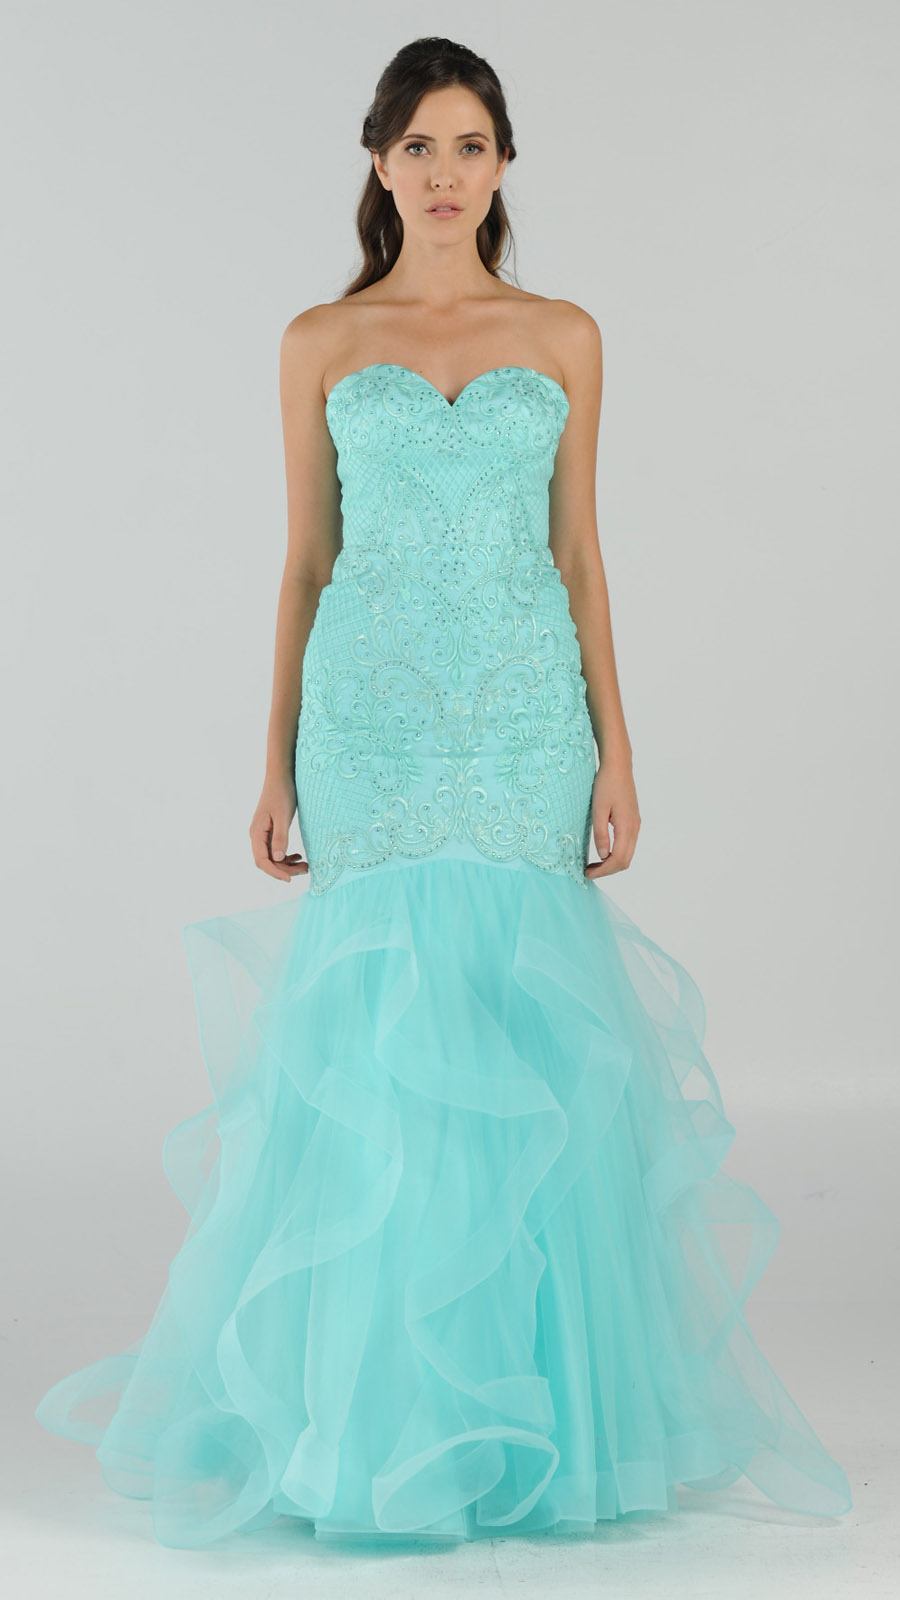 Strapless Tiered Mermaid Long Prom Dress Embroidered Aqua